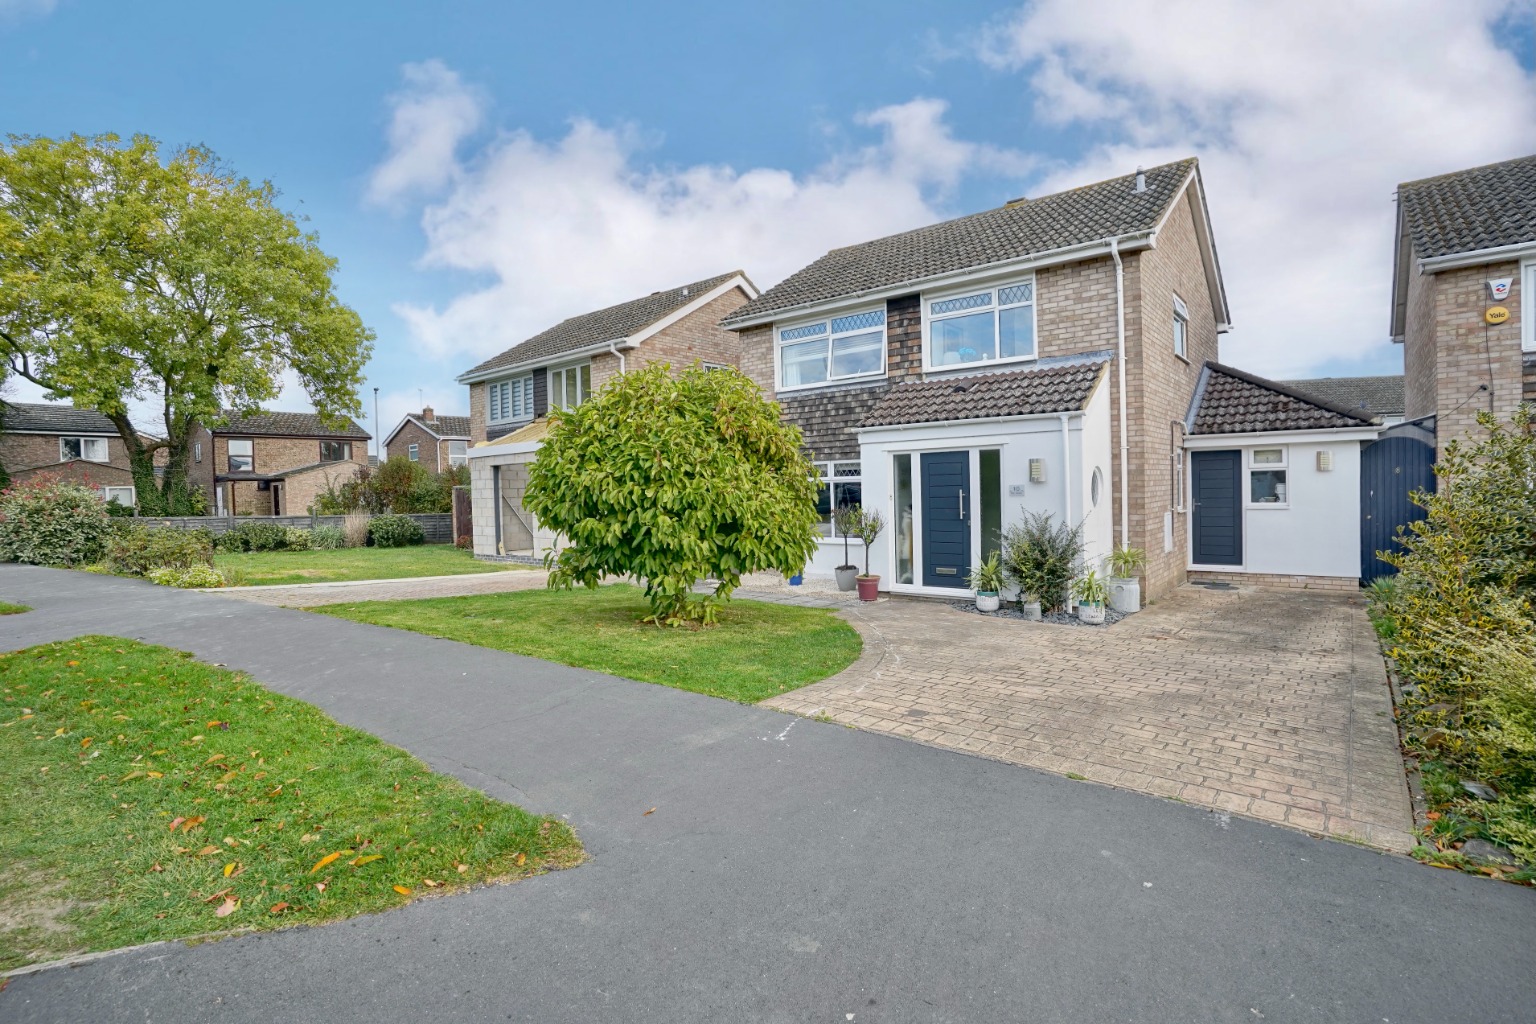 4 bed detached house for sale in Kiln Close, St Ives - Property Image 1